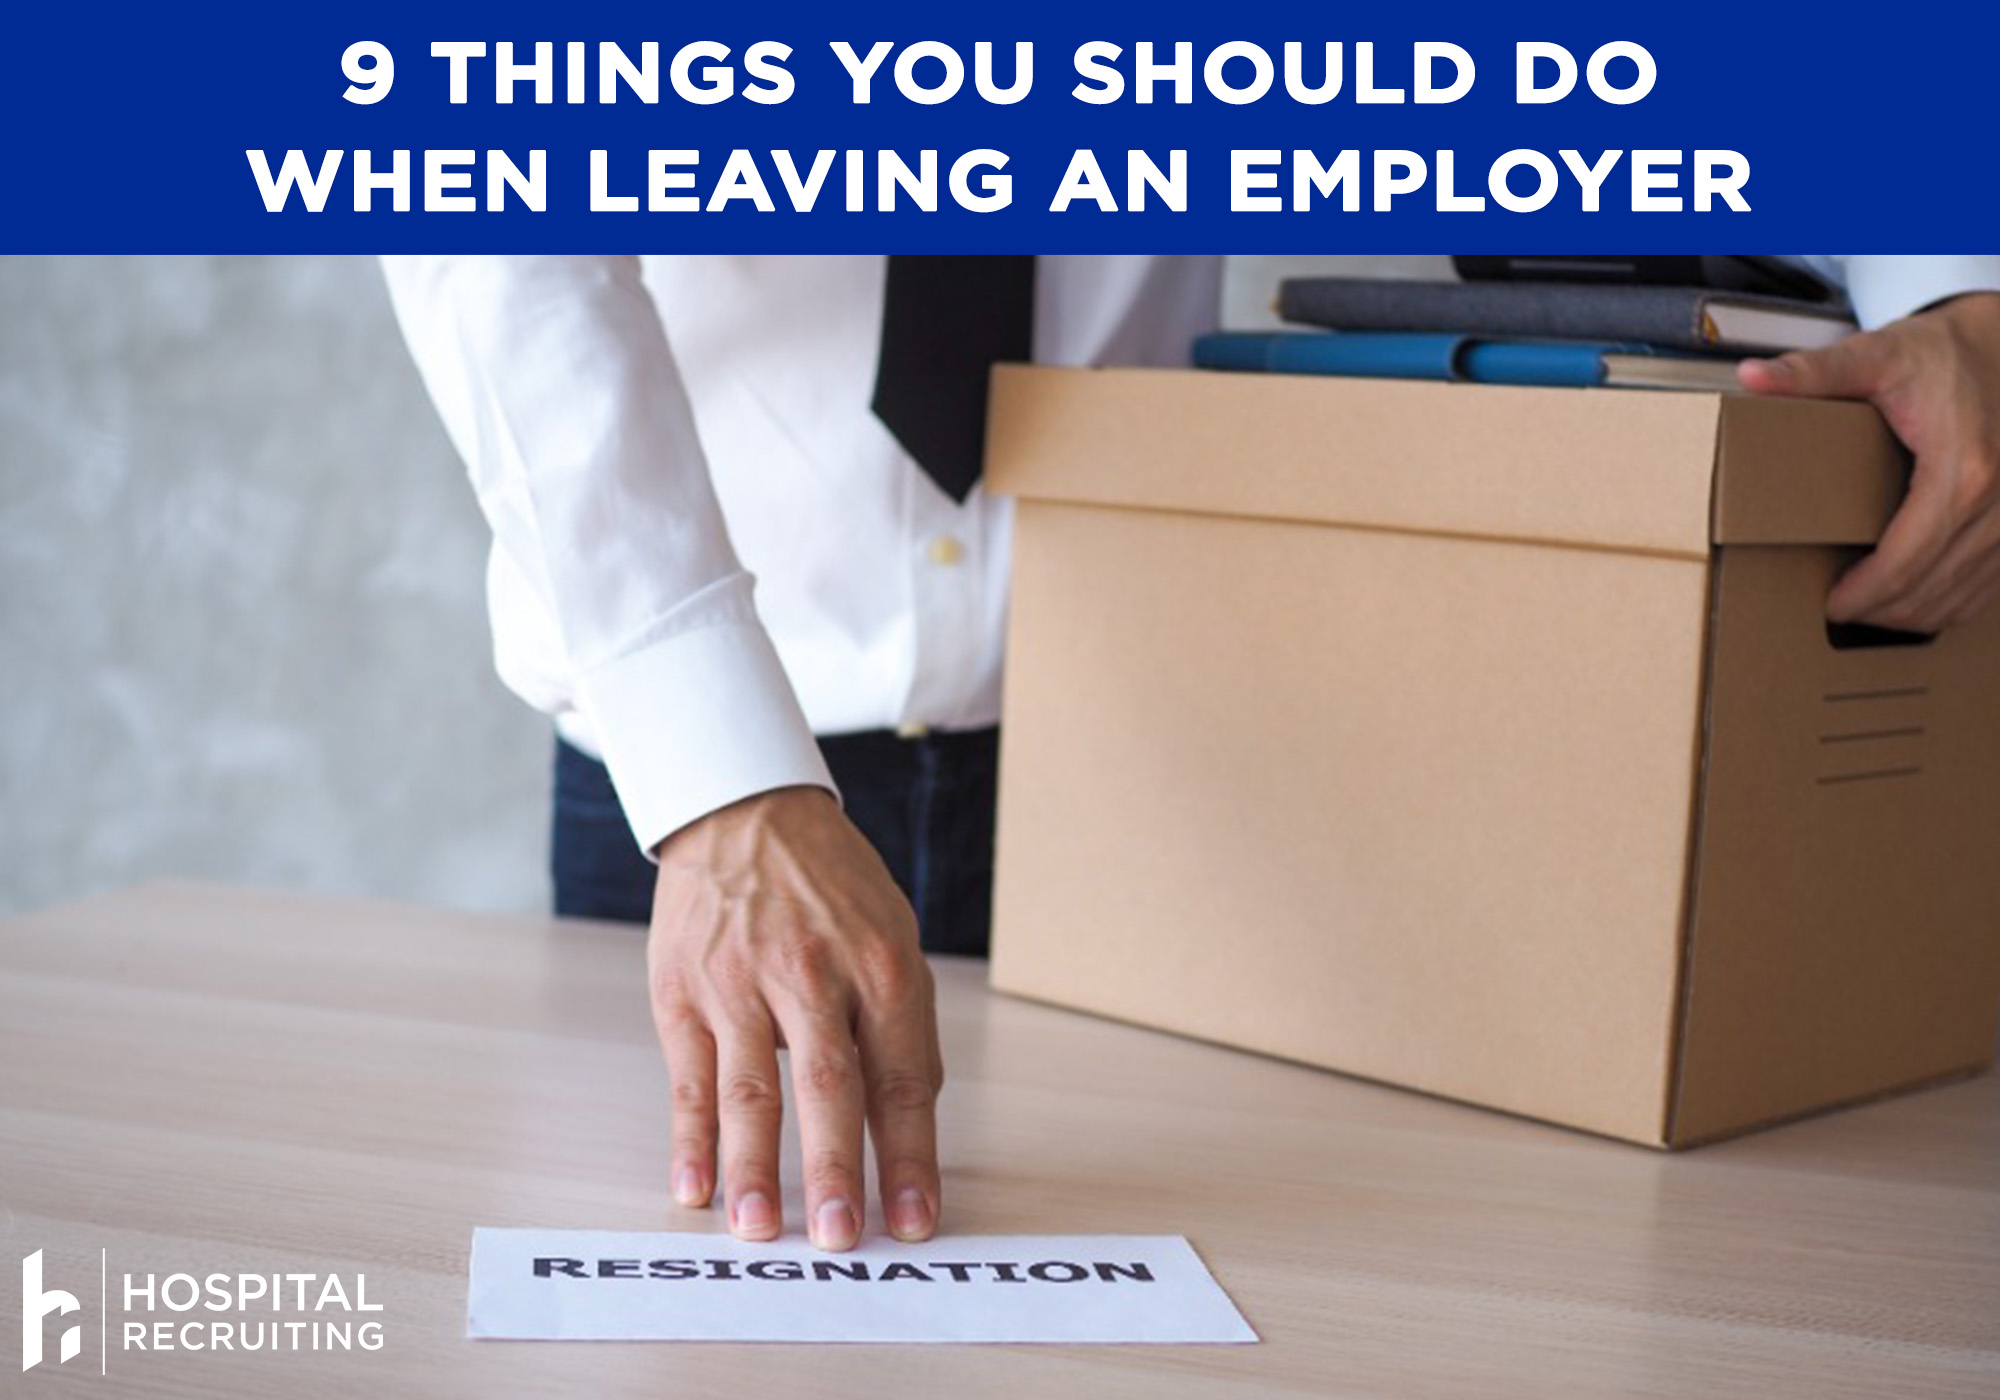 9 things you should do when leaving